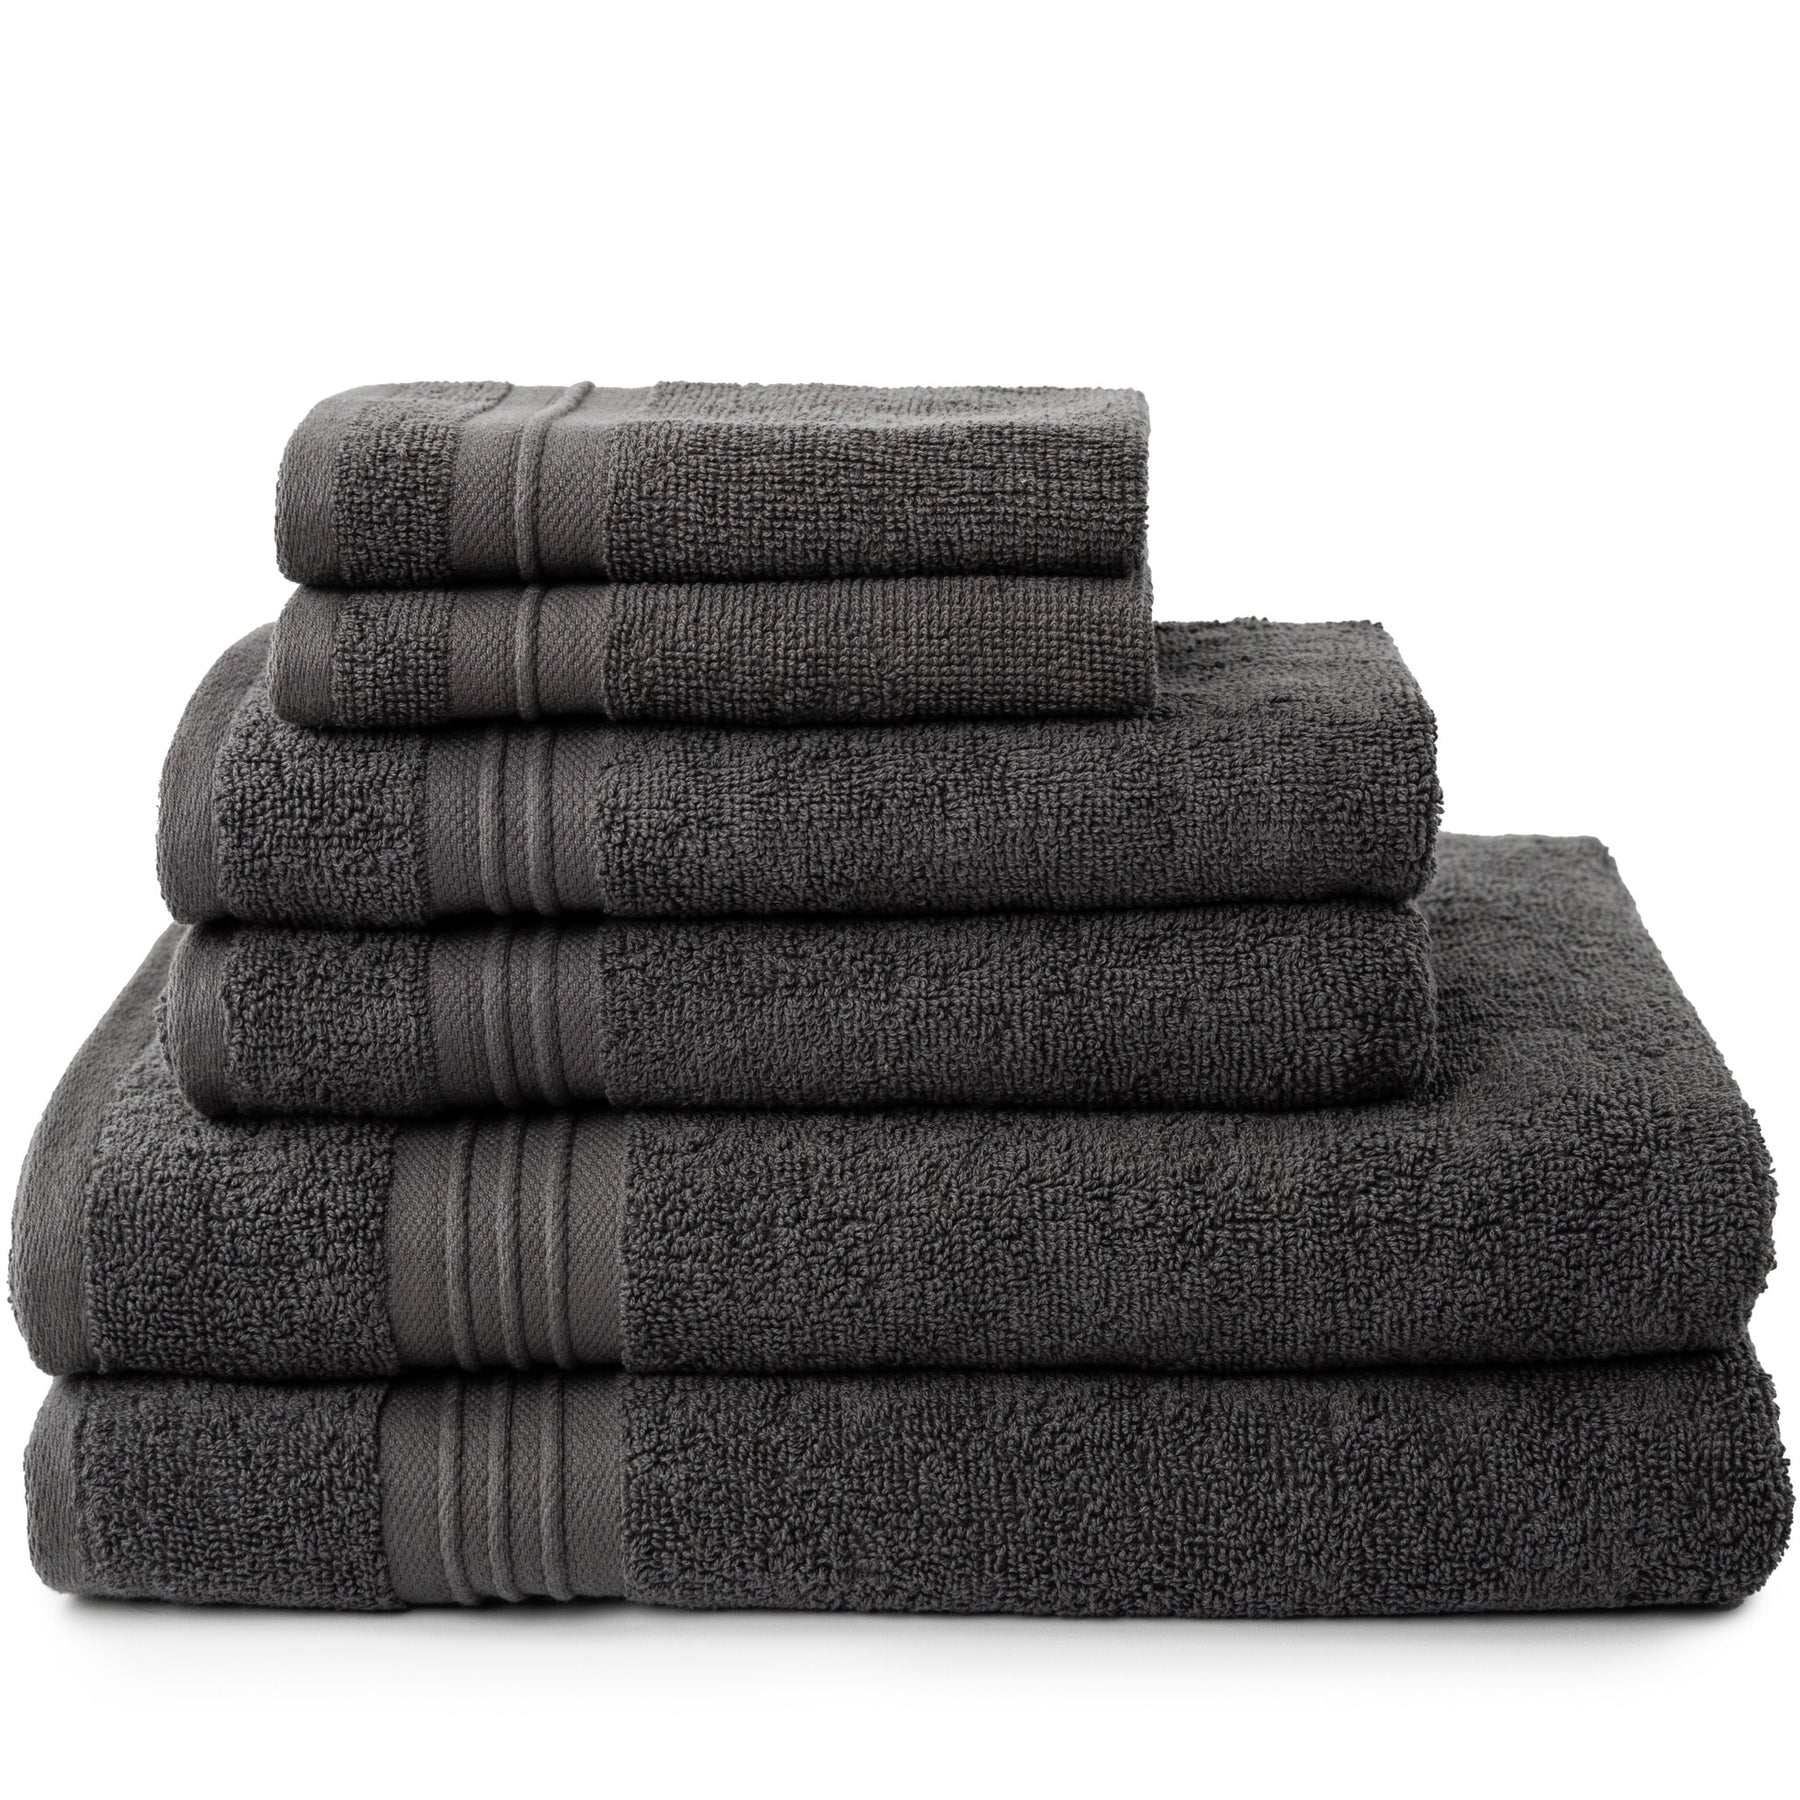 BrylaneHome 6 Piece 100% Cotton Terry Towel Set - 2 Bath Towels 2 Hand  Towels 2 Washcloths, Soft and Plush Highly Absorbent - Raspberry Pink 